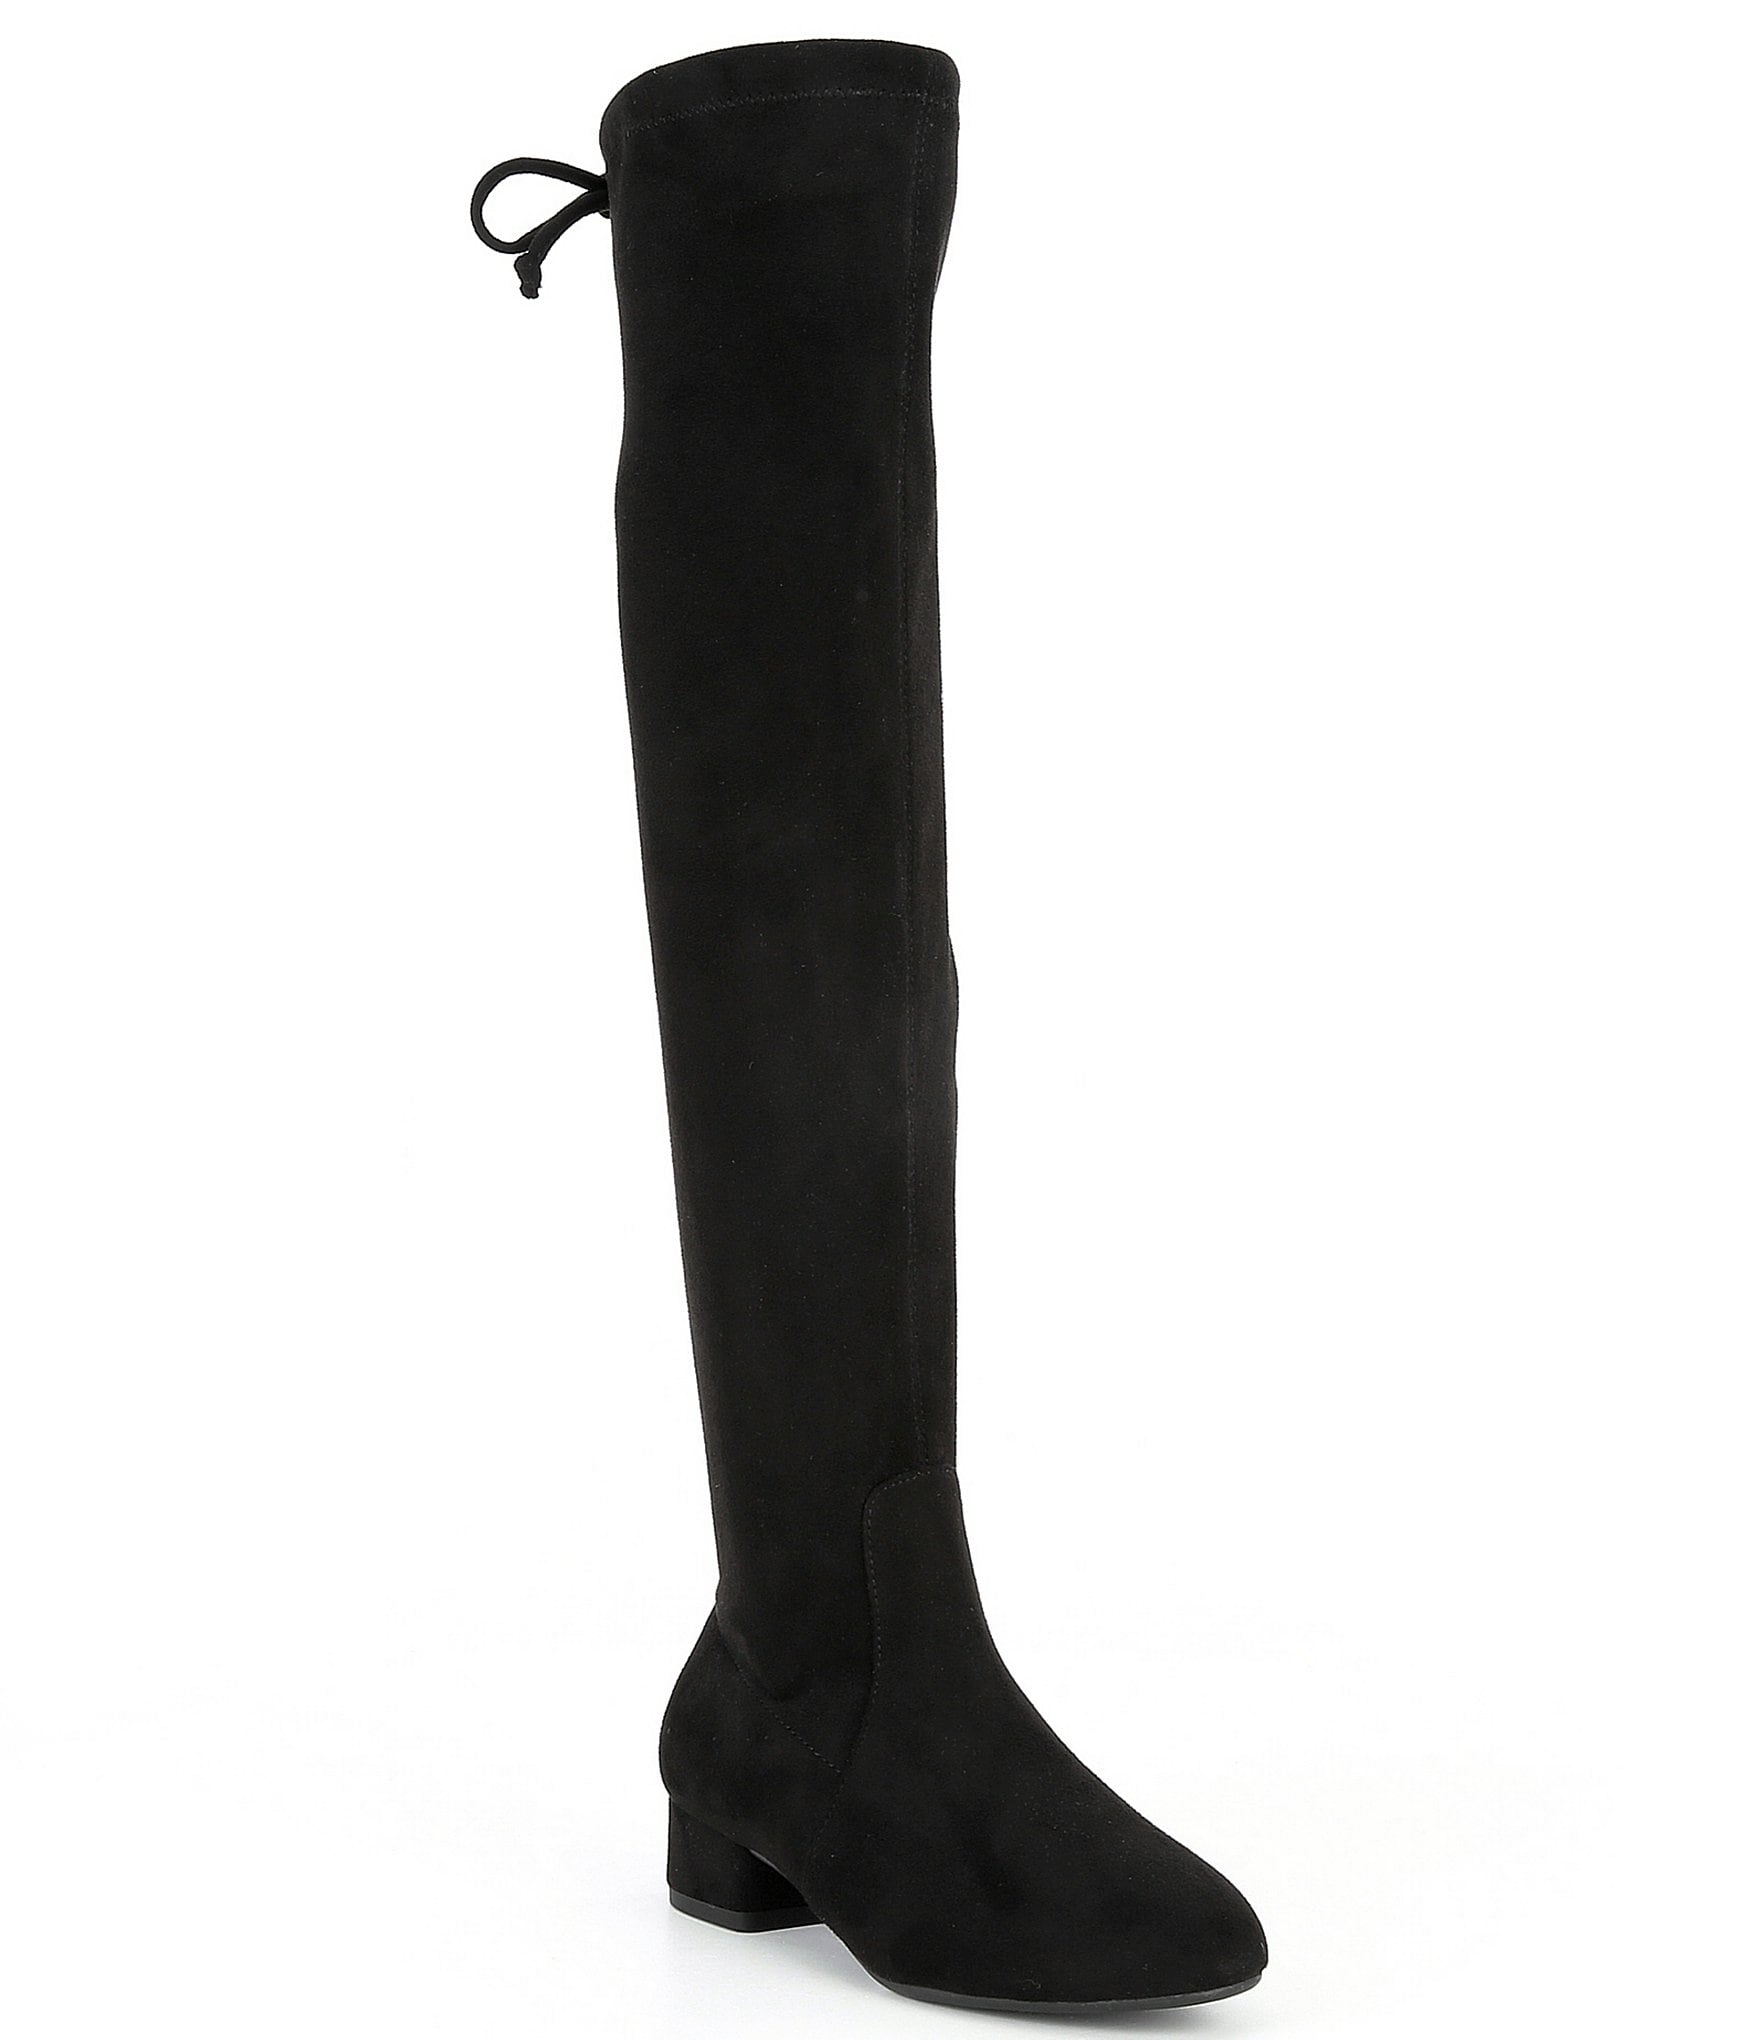 GB Girls' Trilla Suede Over-the-Knee Boots (Youth) | Dillard's